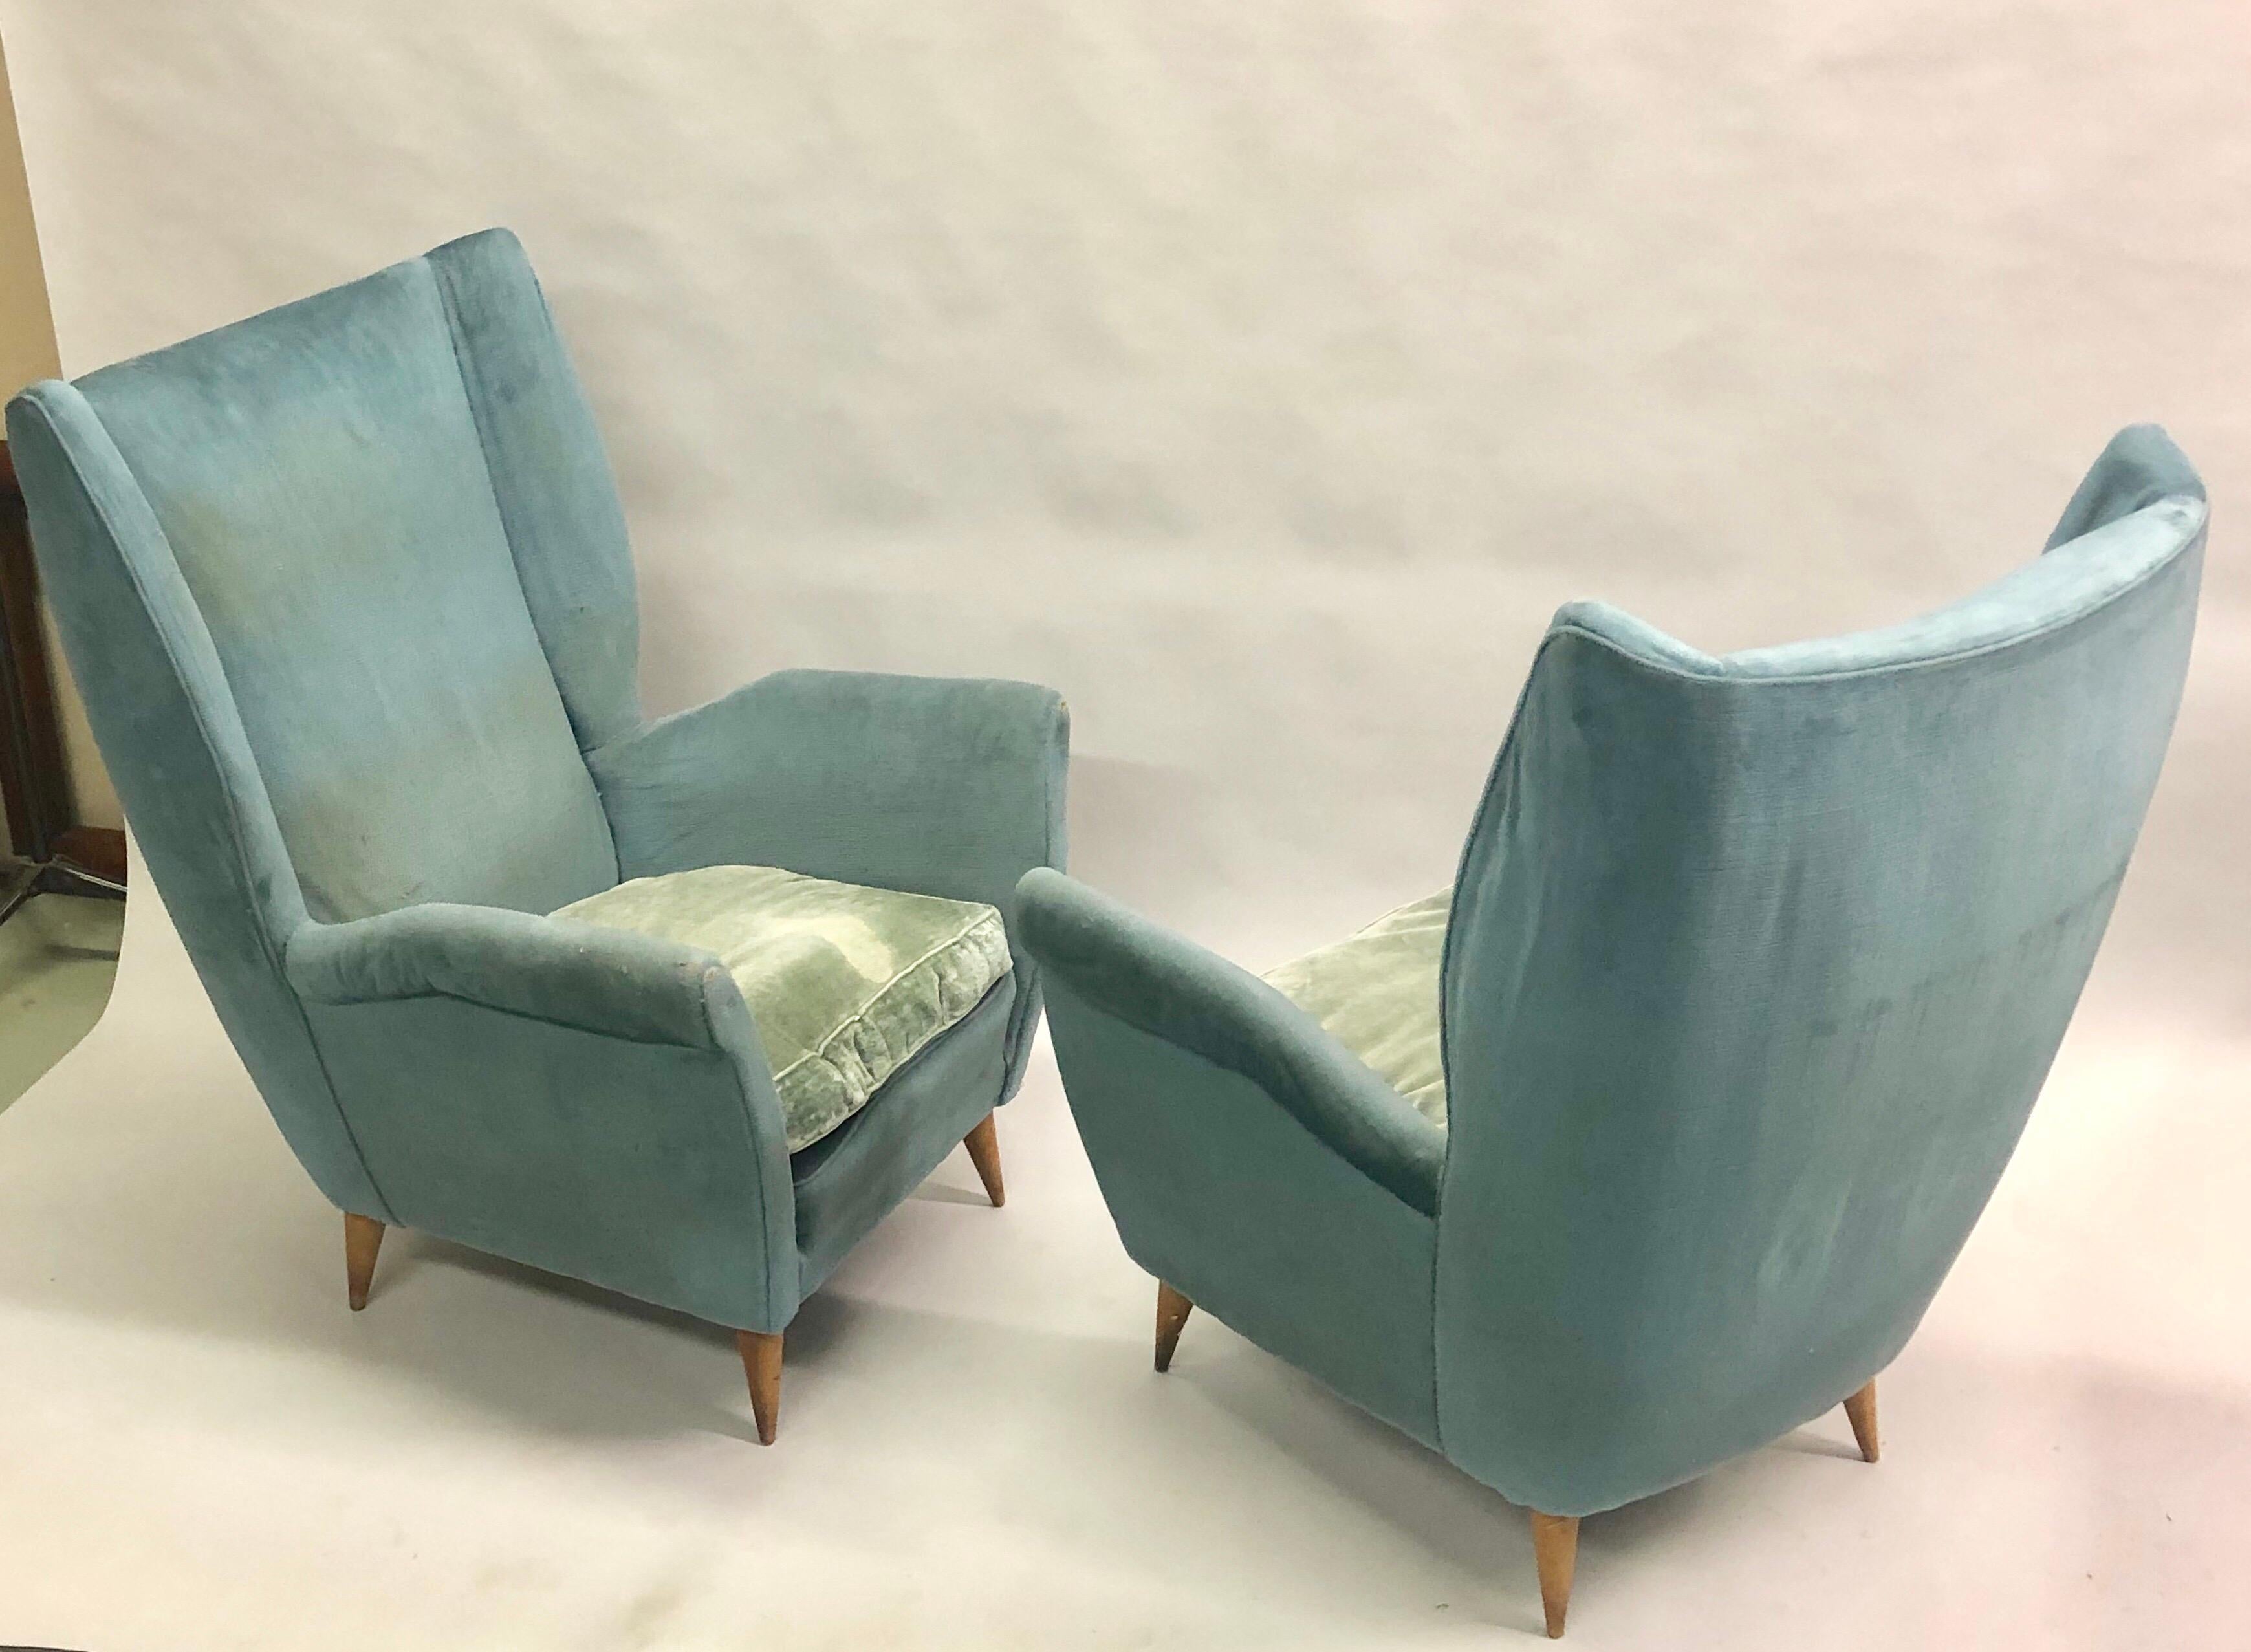 An elegant, stunning pair of Italian Mid-Century Modern armchairs or lounge or wingback or high back chairs by Gio Ponti, 1955 for Editions ISA, Bergamo. Gio Ponti was known for working in the Modern Neoclassical style; these chairs reflect that and